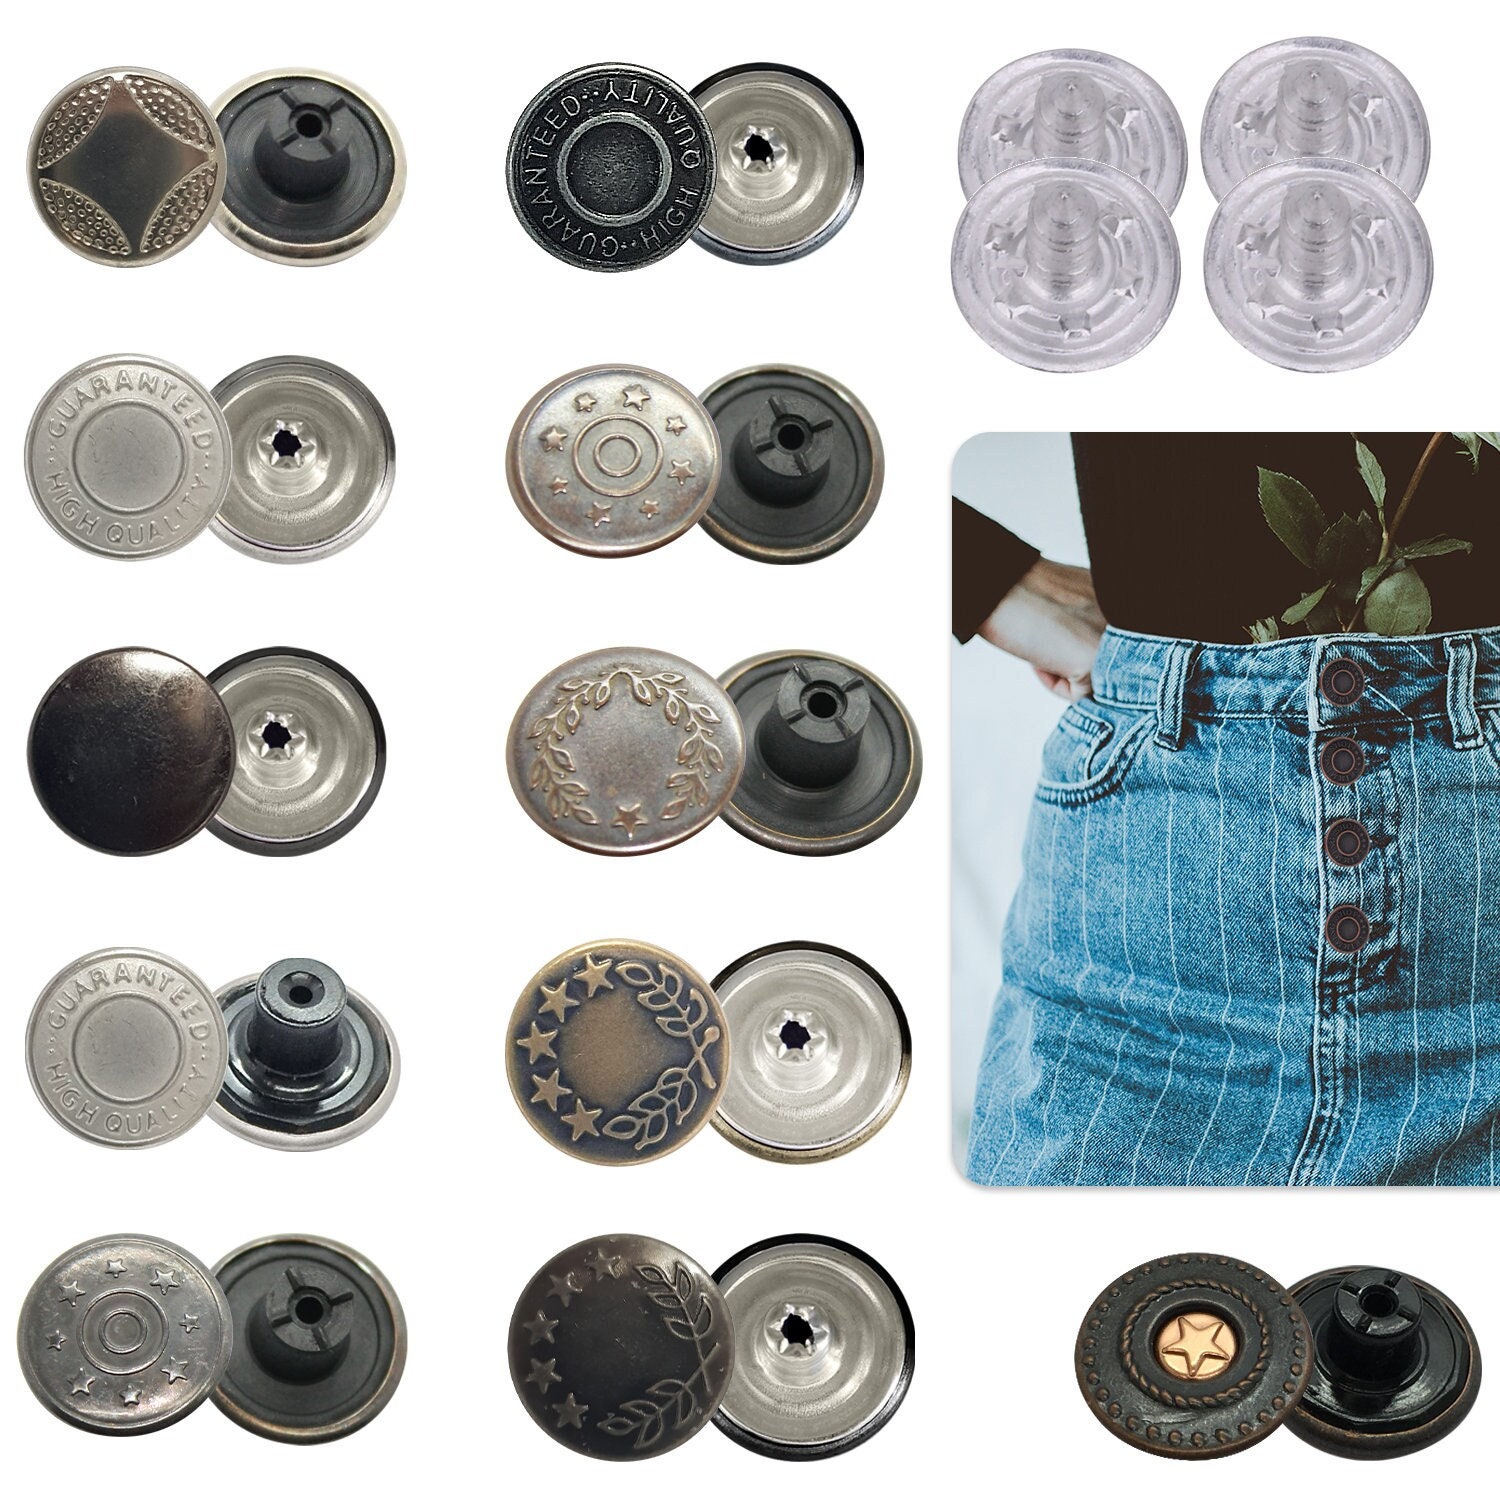 Jeans Buttons With Silver Pins Hammer on Denim Jacket Fixing Fasteners,  Jeans Denim Buttons for Jackets, Jeans, Denim, Leathercraft Projects 